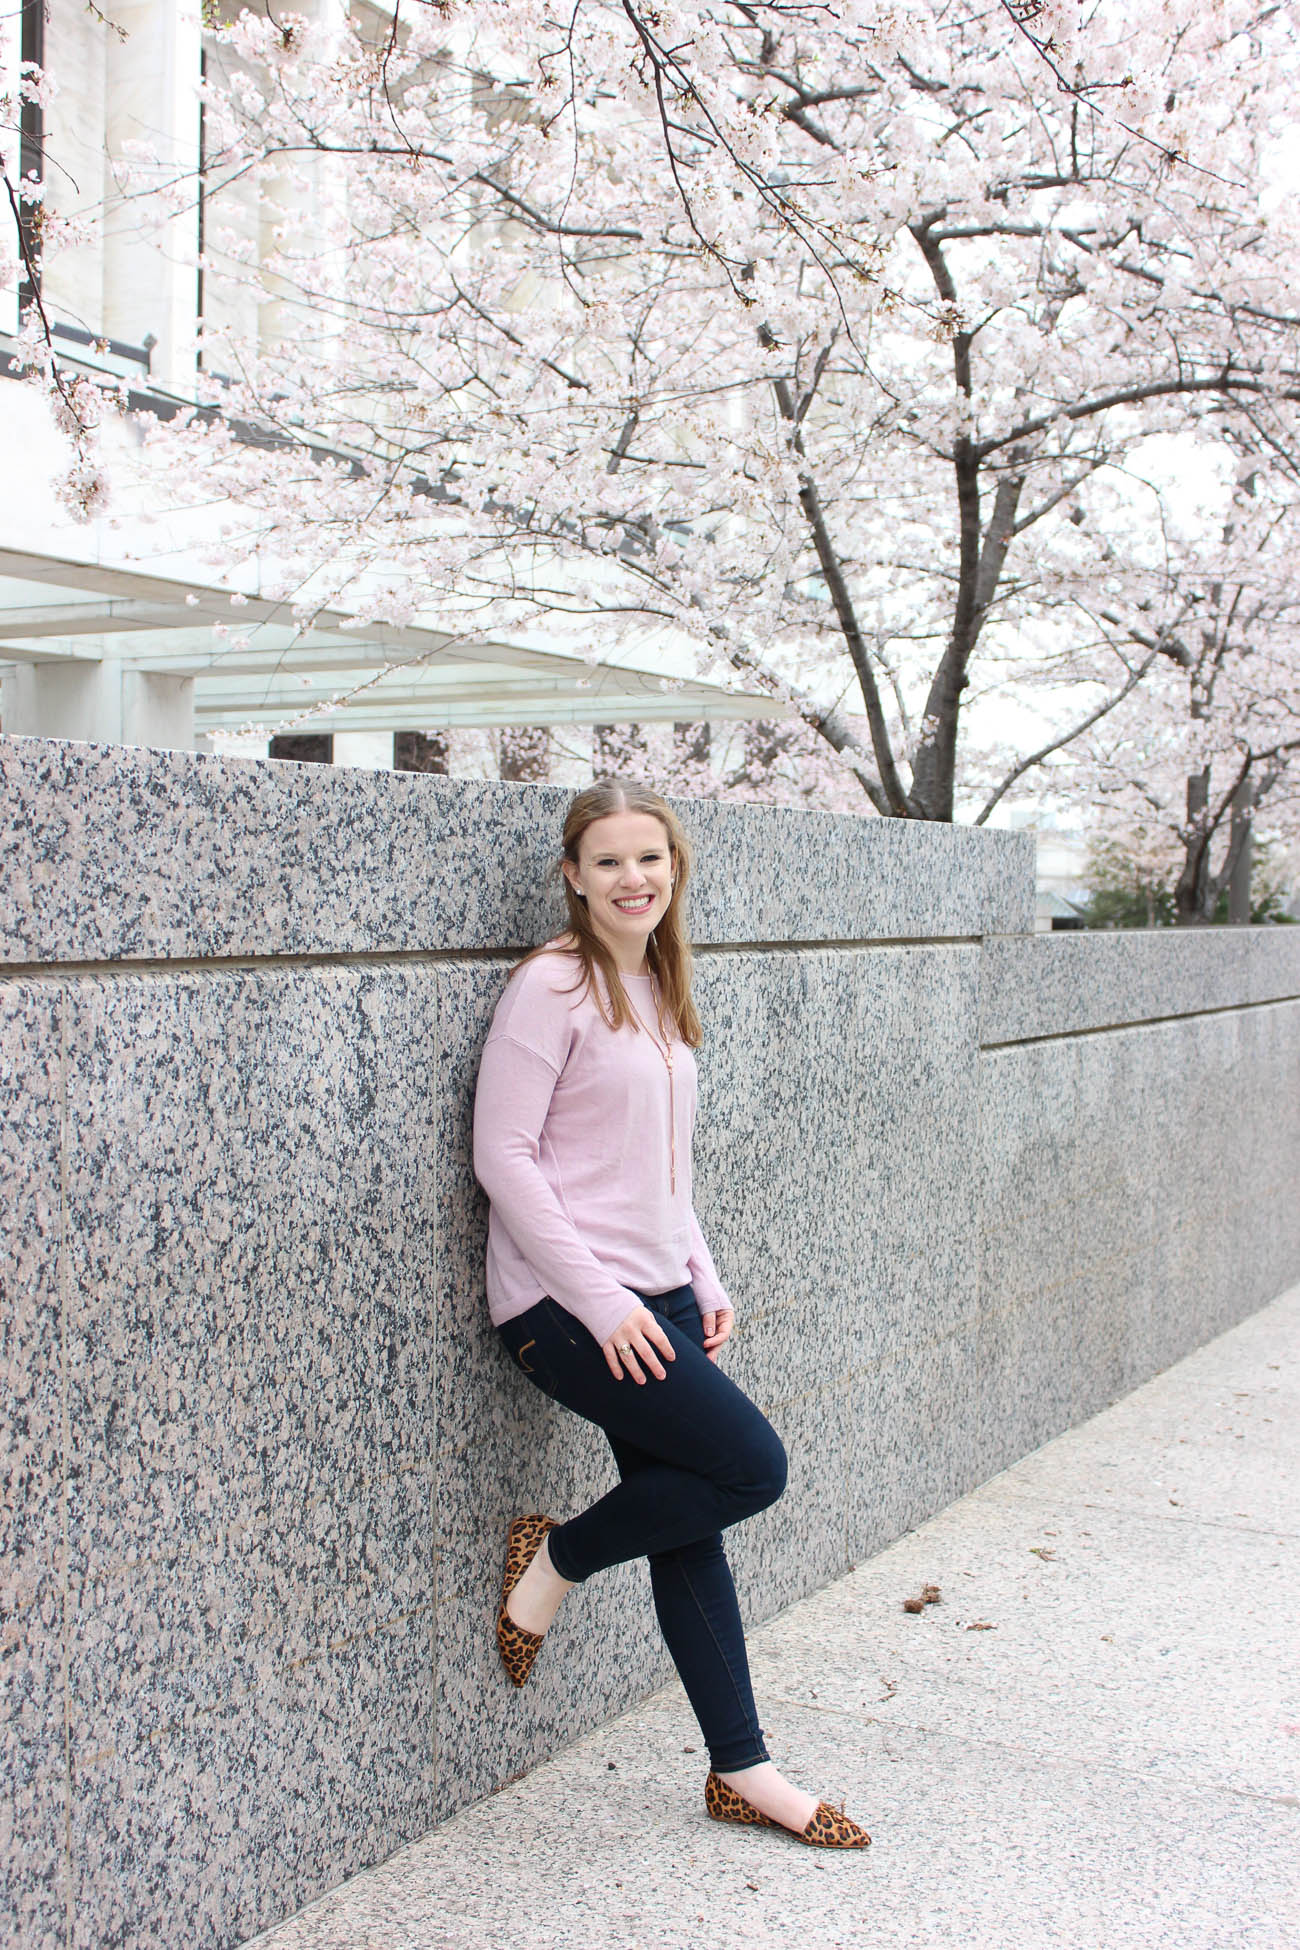 The Cherry Blossoms Outfit | Something Good, @danaerinw, women, fashion, clothing, style, clothes, dolman sleeve sweater, pink sweater, leopard print flats. J.Crew Factory flats, J.Crew d'orsay flats, skinny jeans, denim, jeggings, spring outfits